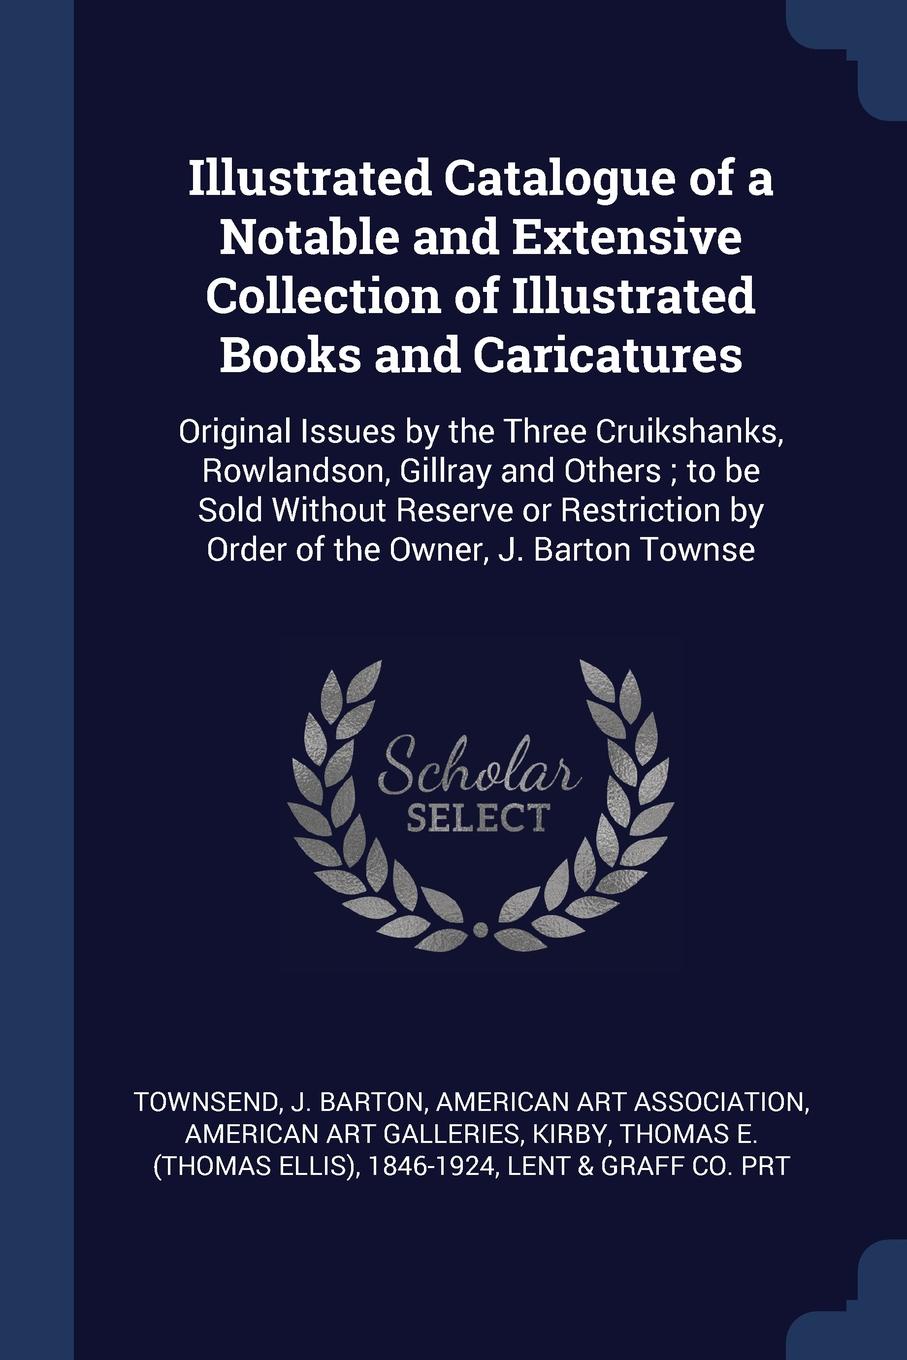 Illustrated Catalogue of a Notable and Extensive Collection of Illustrated Books and Caricatures. Original Issues by the Three Cruikshanks, Rowlandson, Gillray and Others ; to be Sold Without Reserve or Restriction by Order of the Owner, J. Barton...